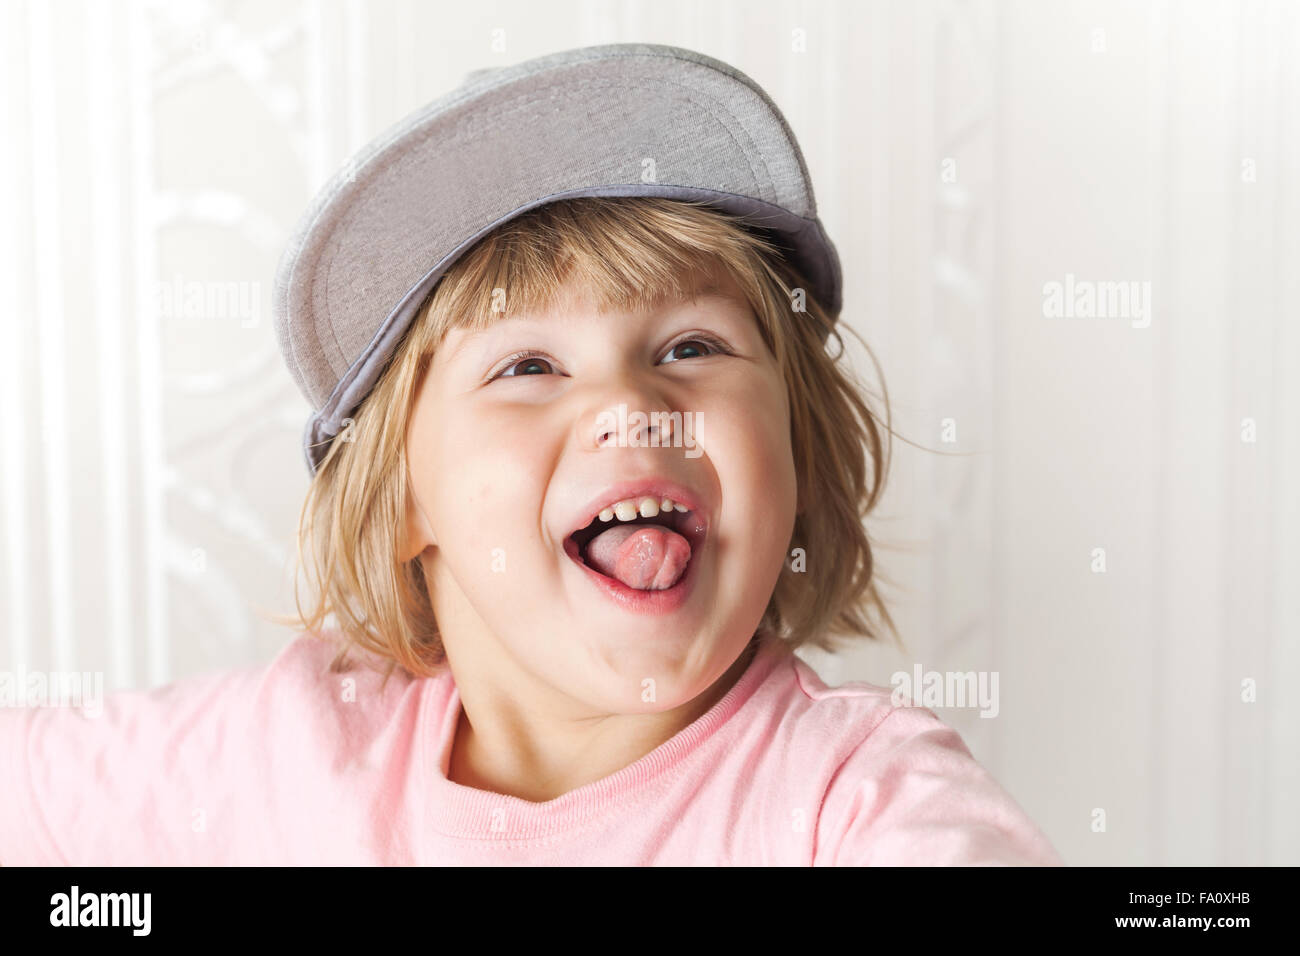 Closeup portrait of funny laughing cute Caucasian blond baby girl in gray cap Stock Photo